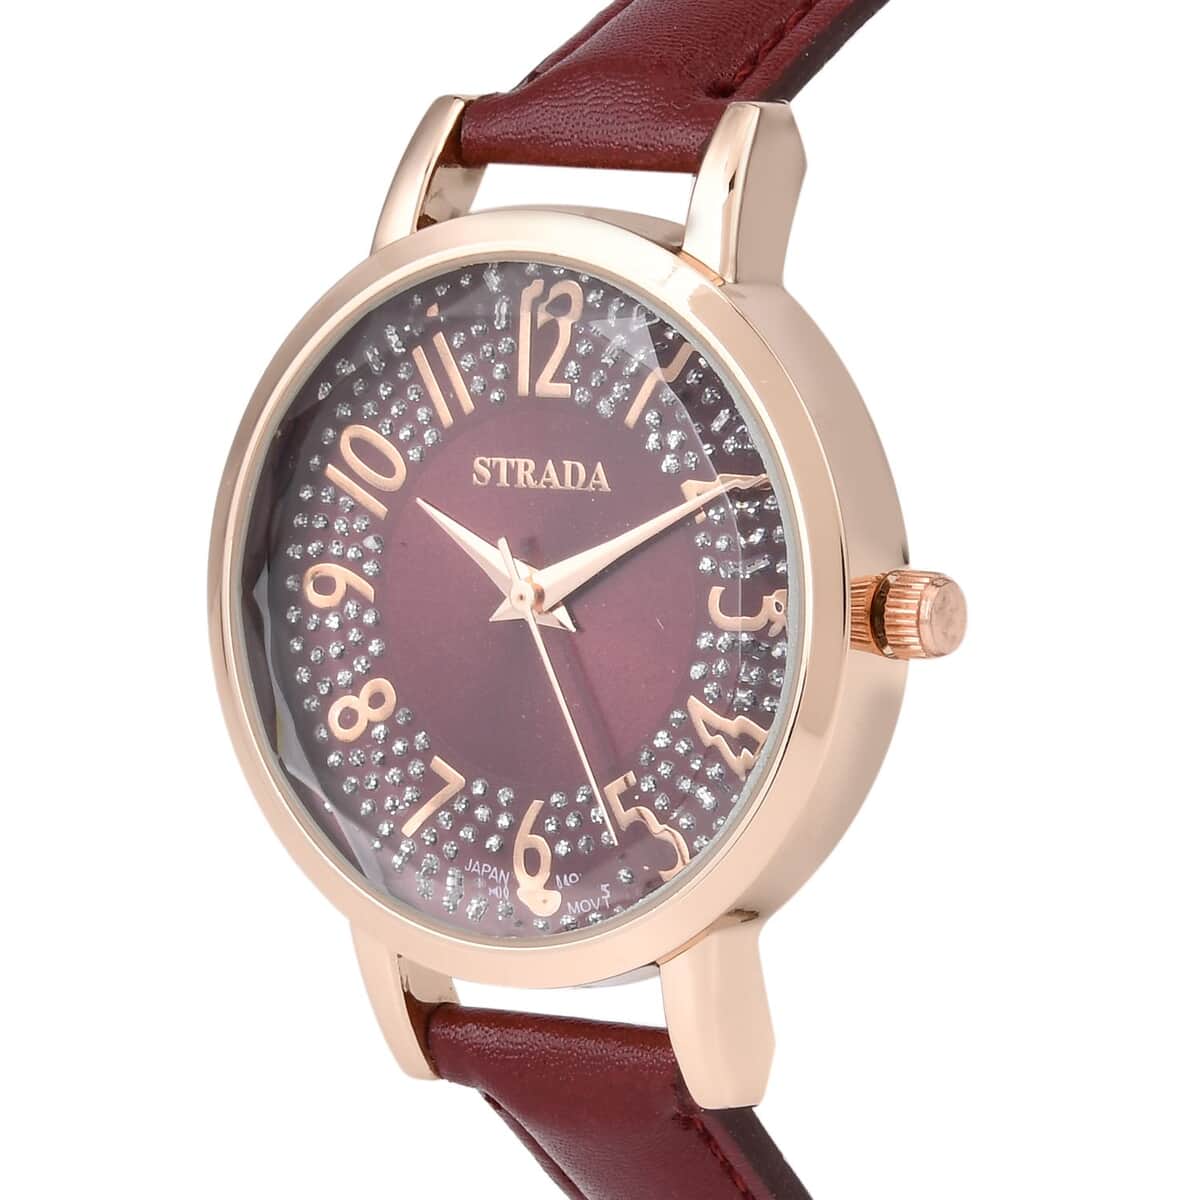 Strada Japanese Movement Watch in Rosetone with Brown Faux Leather Strap (35.05mm) (6.25-8 In) image number 3